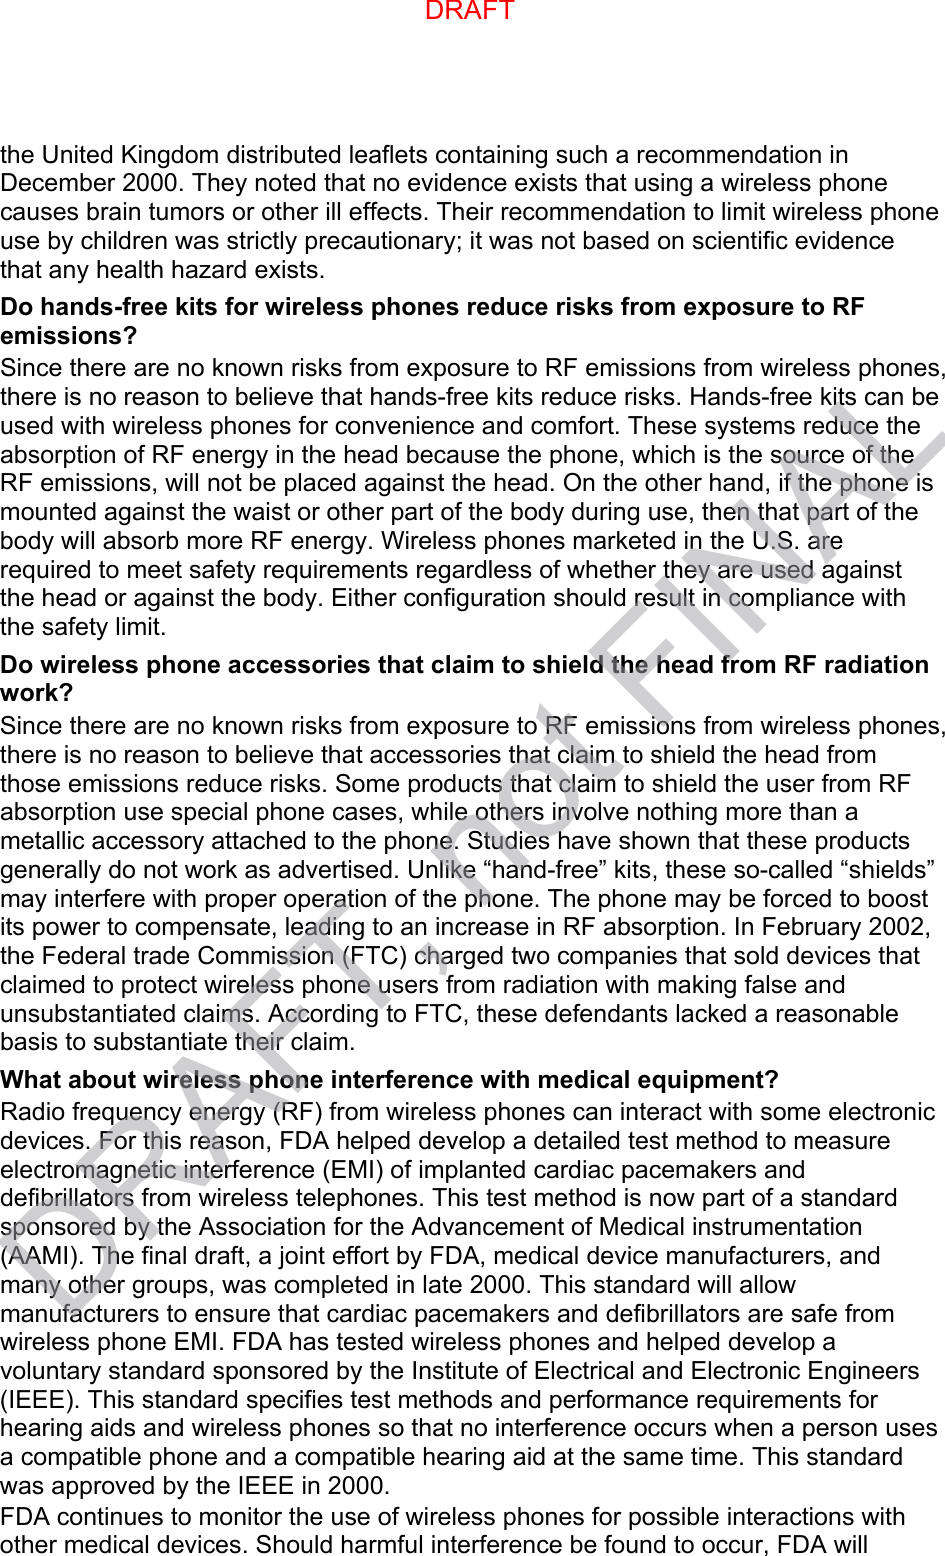 the United Kingdom distributed leaflets containing such a recommendation in December 2000. They noted that no evidence exists that using a wireless phone causes brain tumors or other ill effects. Their recommendation to limit wireless phone use by children was strictly precautionary; it was not based on scientific evidence that any health hazard exists.   Do hands-free kits for wireless phones reduce risks from exposure to RF emissions? Since there are no known risks from exposure to RF emissions from wireless phones, there is no reason to believe that hands-free kits reduce risks. Hands-free kits can be used with wireless phones for convenience and comfort. These systems reduce the absorption of RF energy in the head because the phone, which is the source of the RF emissions, will not be placed against the head. On the other hand, if the phone is mounted against the waist or other part of the body during use, then that part of the body will absorb more RF energy. Wireless phones marketed in the U.S. are required to meet safety requirements regardless of whether they are used against the head or against the body. Either configuration should result in compliance with the safety limit. Do wireless phone accessories that claim to shield the head from RF radiation work? Since there are no known risks from exposure to RF emissions from wireless phones, there is no reason to believe that accessories that claim to shield the head from those emissions reduce risks. Some products that claim to shield the user from RF absorption use special phone cases, while others involve nothing more than a metallic accessory attached to the phone. Studies have shown that these products generally do not work as advertised. Unlike “hand-free” kits, these so-called “shields” may interfere with proper operation of the phone. The phone may be forced to boost its power to compensate, leading to an increase in RF absorption. In February 2002, the Federal trade Commission (FTC) charged two companies that sold devices that claimed to protect wireless phone users from radiation with making false and unsubstantiated claims. According to FTC, these defendants lacked a reasonable basis to substantiate their claim. What about wireless phone interference with medical equipment? Radio frequency energy (RF) from wireless phones can interact with some electronic devices. For this reason, FDA helped develop a detailed test method to measure electromagnetic interference (EMI) of implanted cardiac pacemakers and defibrillators from wireless telephones. This test method is now part of a standard sponsored by the Association for the Advancement of Medical instrumentation (AAMI). The final draft, a joint effort by FDA, medical device manufacturers, and many other groups, was completed in late 2000. This standard will allow manufacturers to ensure that cardiac pacemakers and defibrillators are safe from wireless phone EMI. FDA has tested wireless phones and helped develop a voluntary standard sponsored by the Institute of Electrical and Electronic Engineers (IEEE). This standard specifies test methods and performance requirements for hearing aids and wireless phones so that no interference occurs when a person uses a compatible phone and a compatible hearing aid at the same time. This standard was approved by the IEEE in 2000. FDA continues to monitor the use of wireless phones for possible interactions with other medical devices. Should harmful interference be found to occur, FDA will DRAFTDRAFT, not FINAL